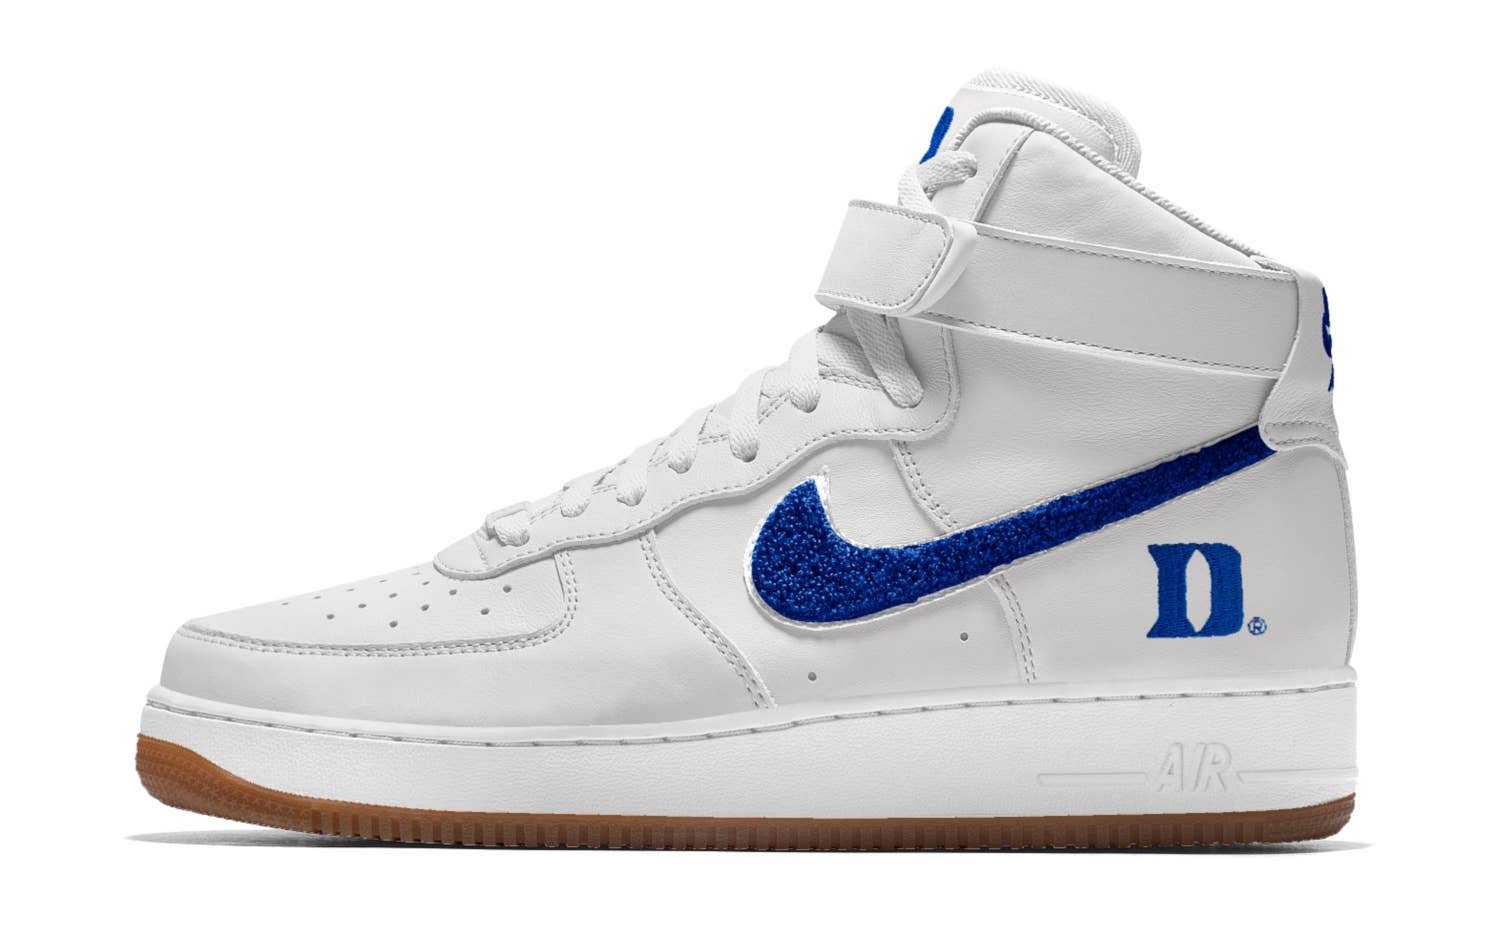 Nike Lets You Customize March Madness Sneakers for Your School | Complex